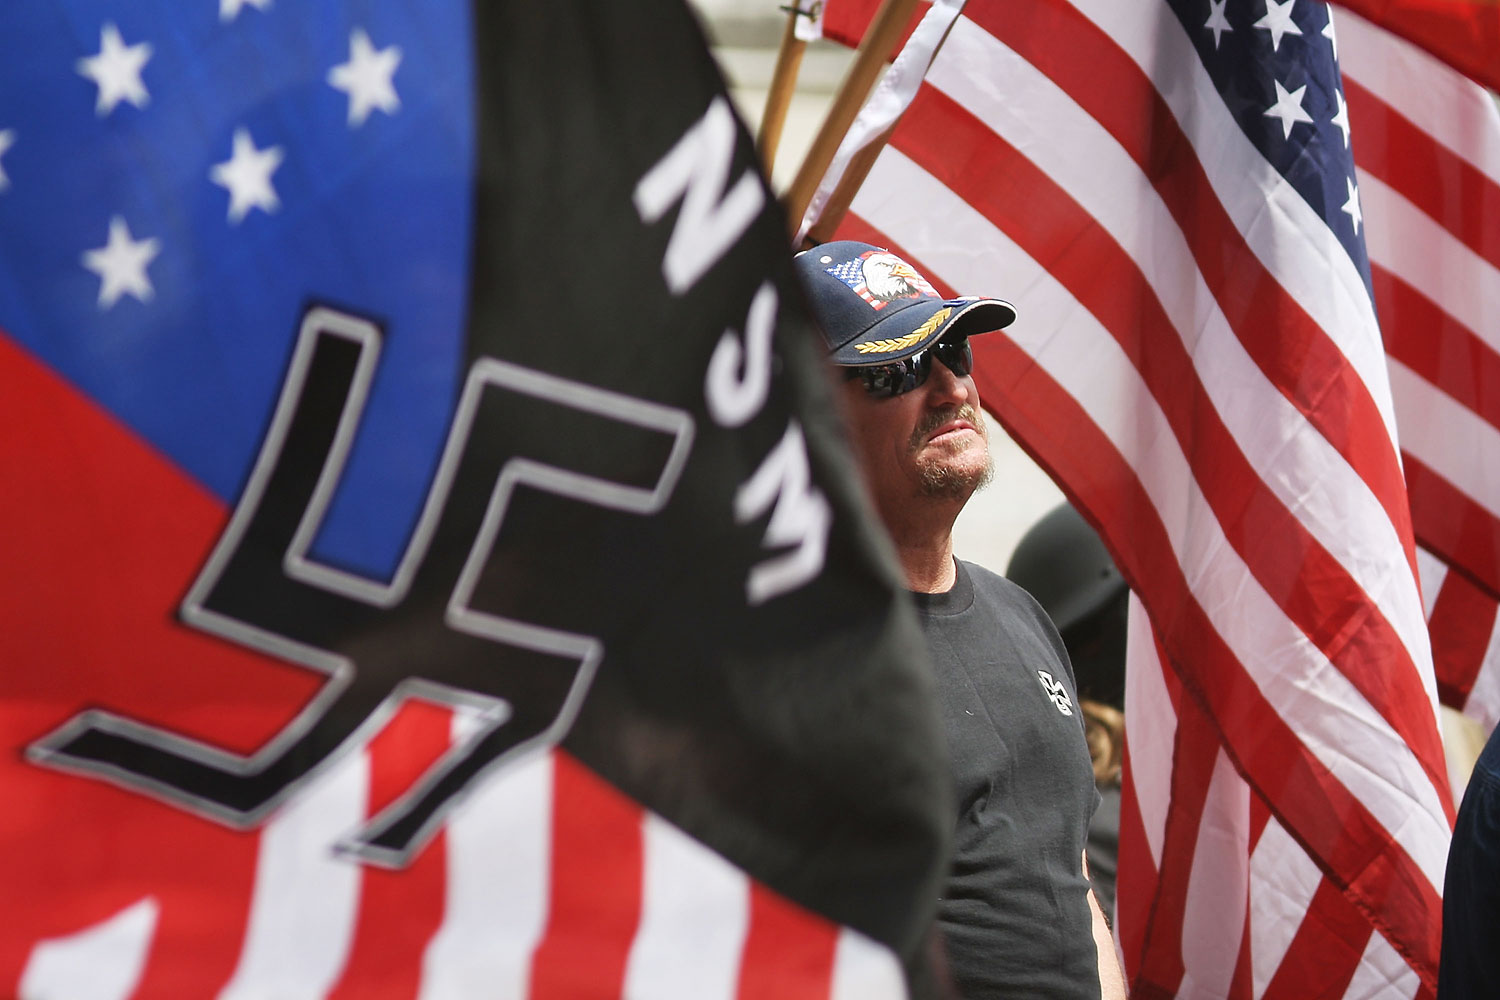 Members of the National Socialist Movement rally in Los Angeles, in 2010. (David McNew—Getty Images)